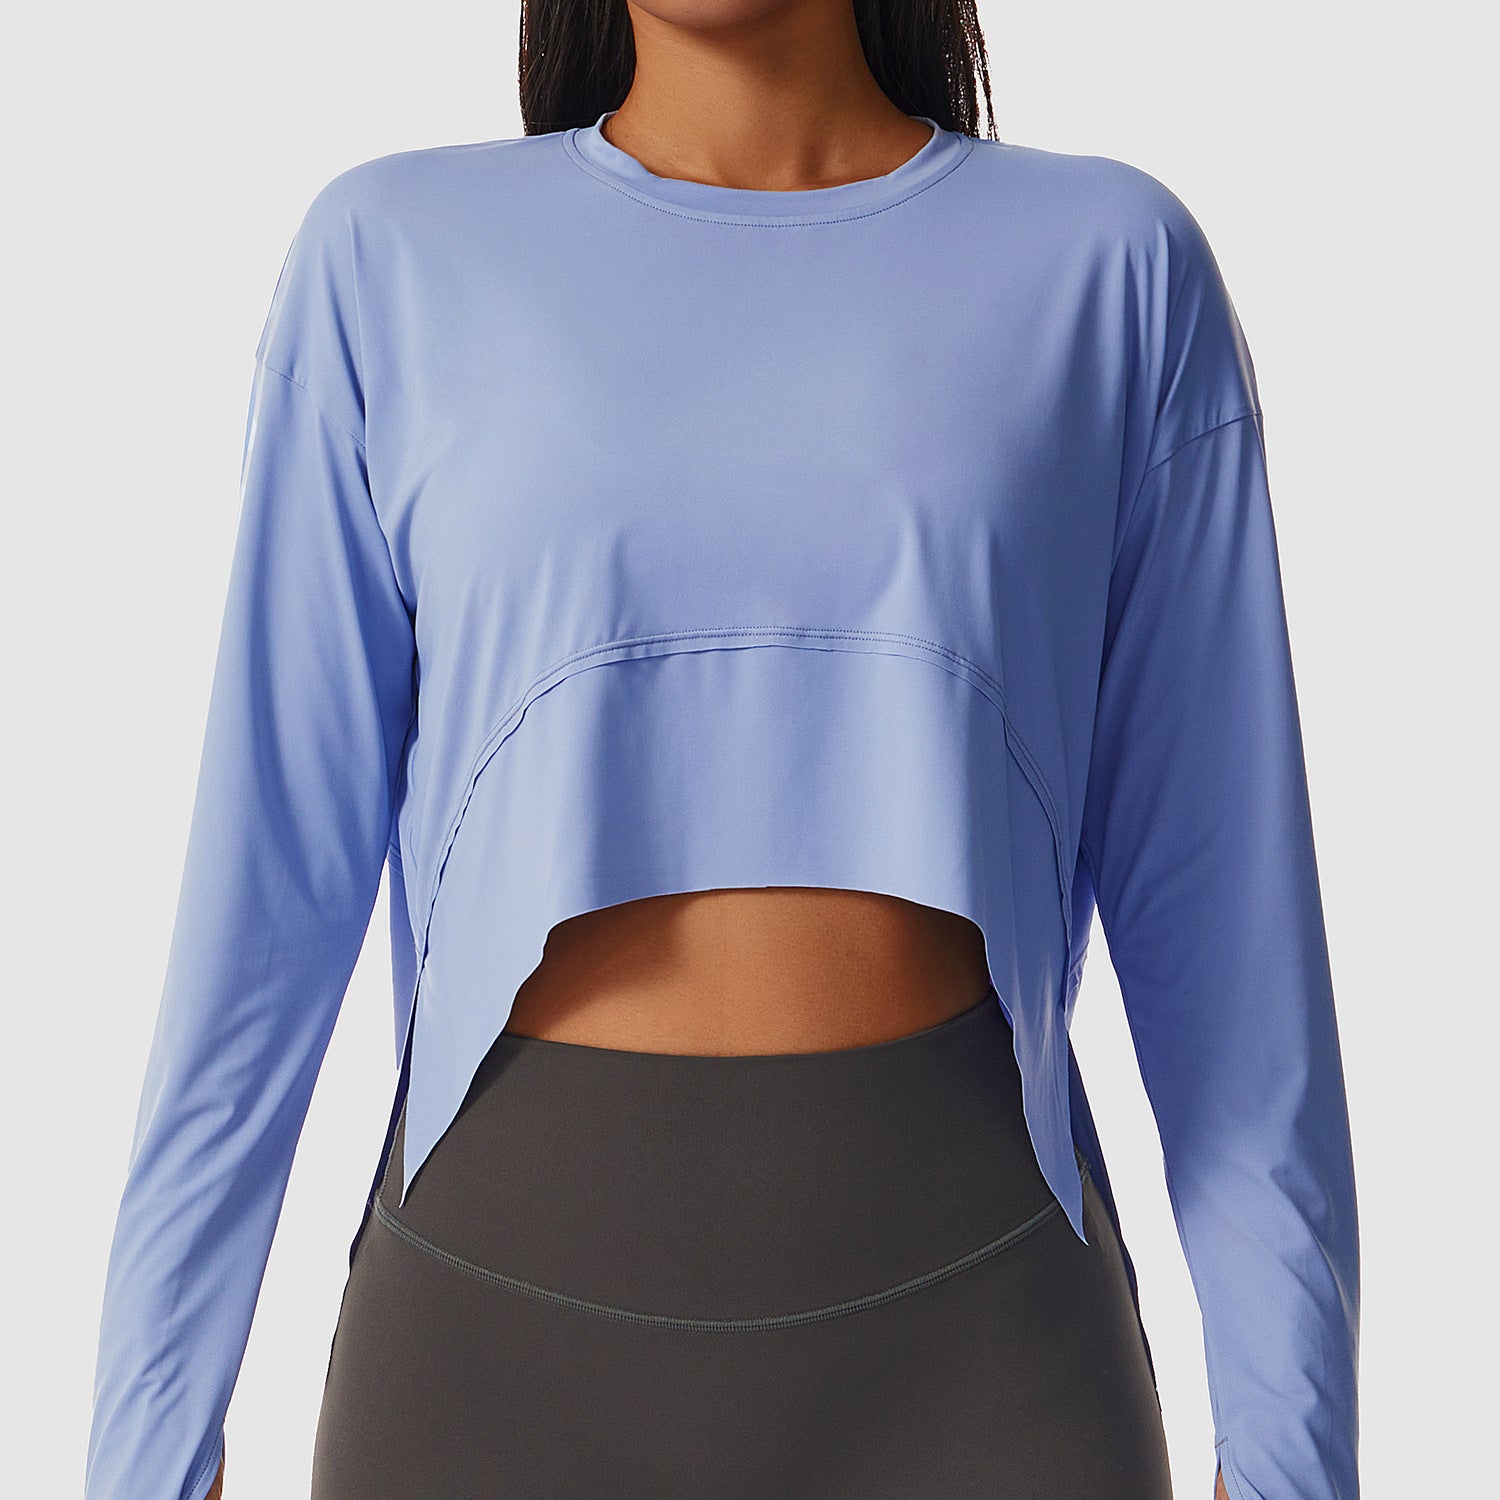 Breathable quick dry training long sleeve